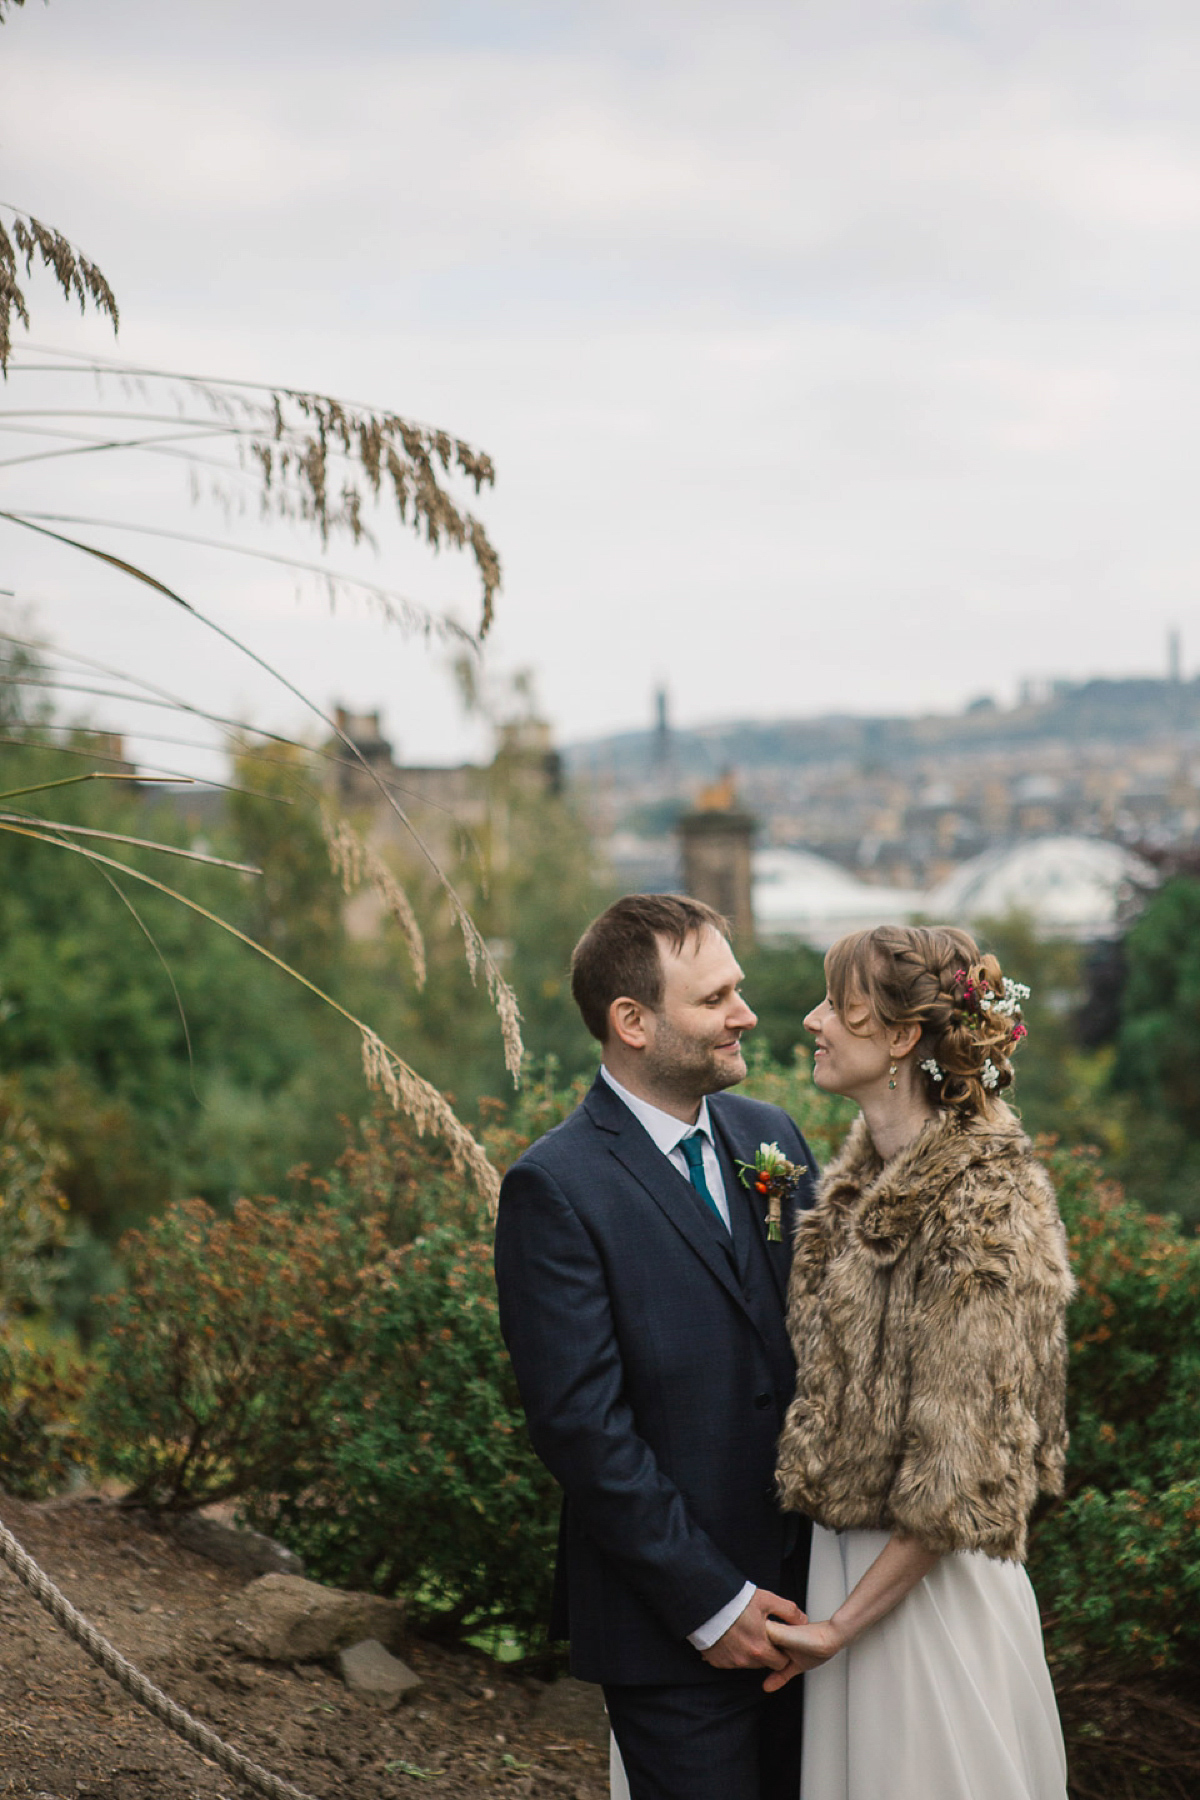 Julia wore a gown by Rowanjoy and a pair of green wedding shoes for her Royal Botanical Gardens wedding in Edinburgh. Photography by Jen Owens.